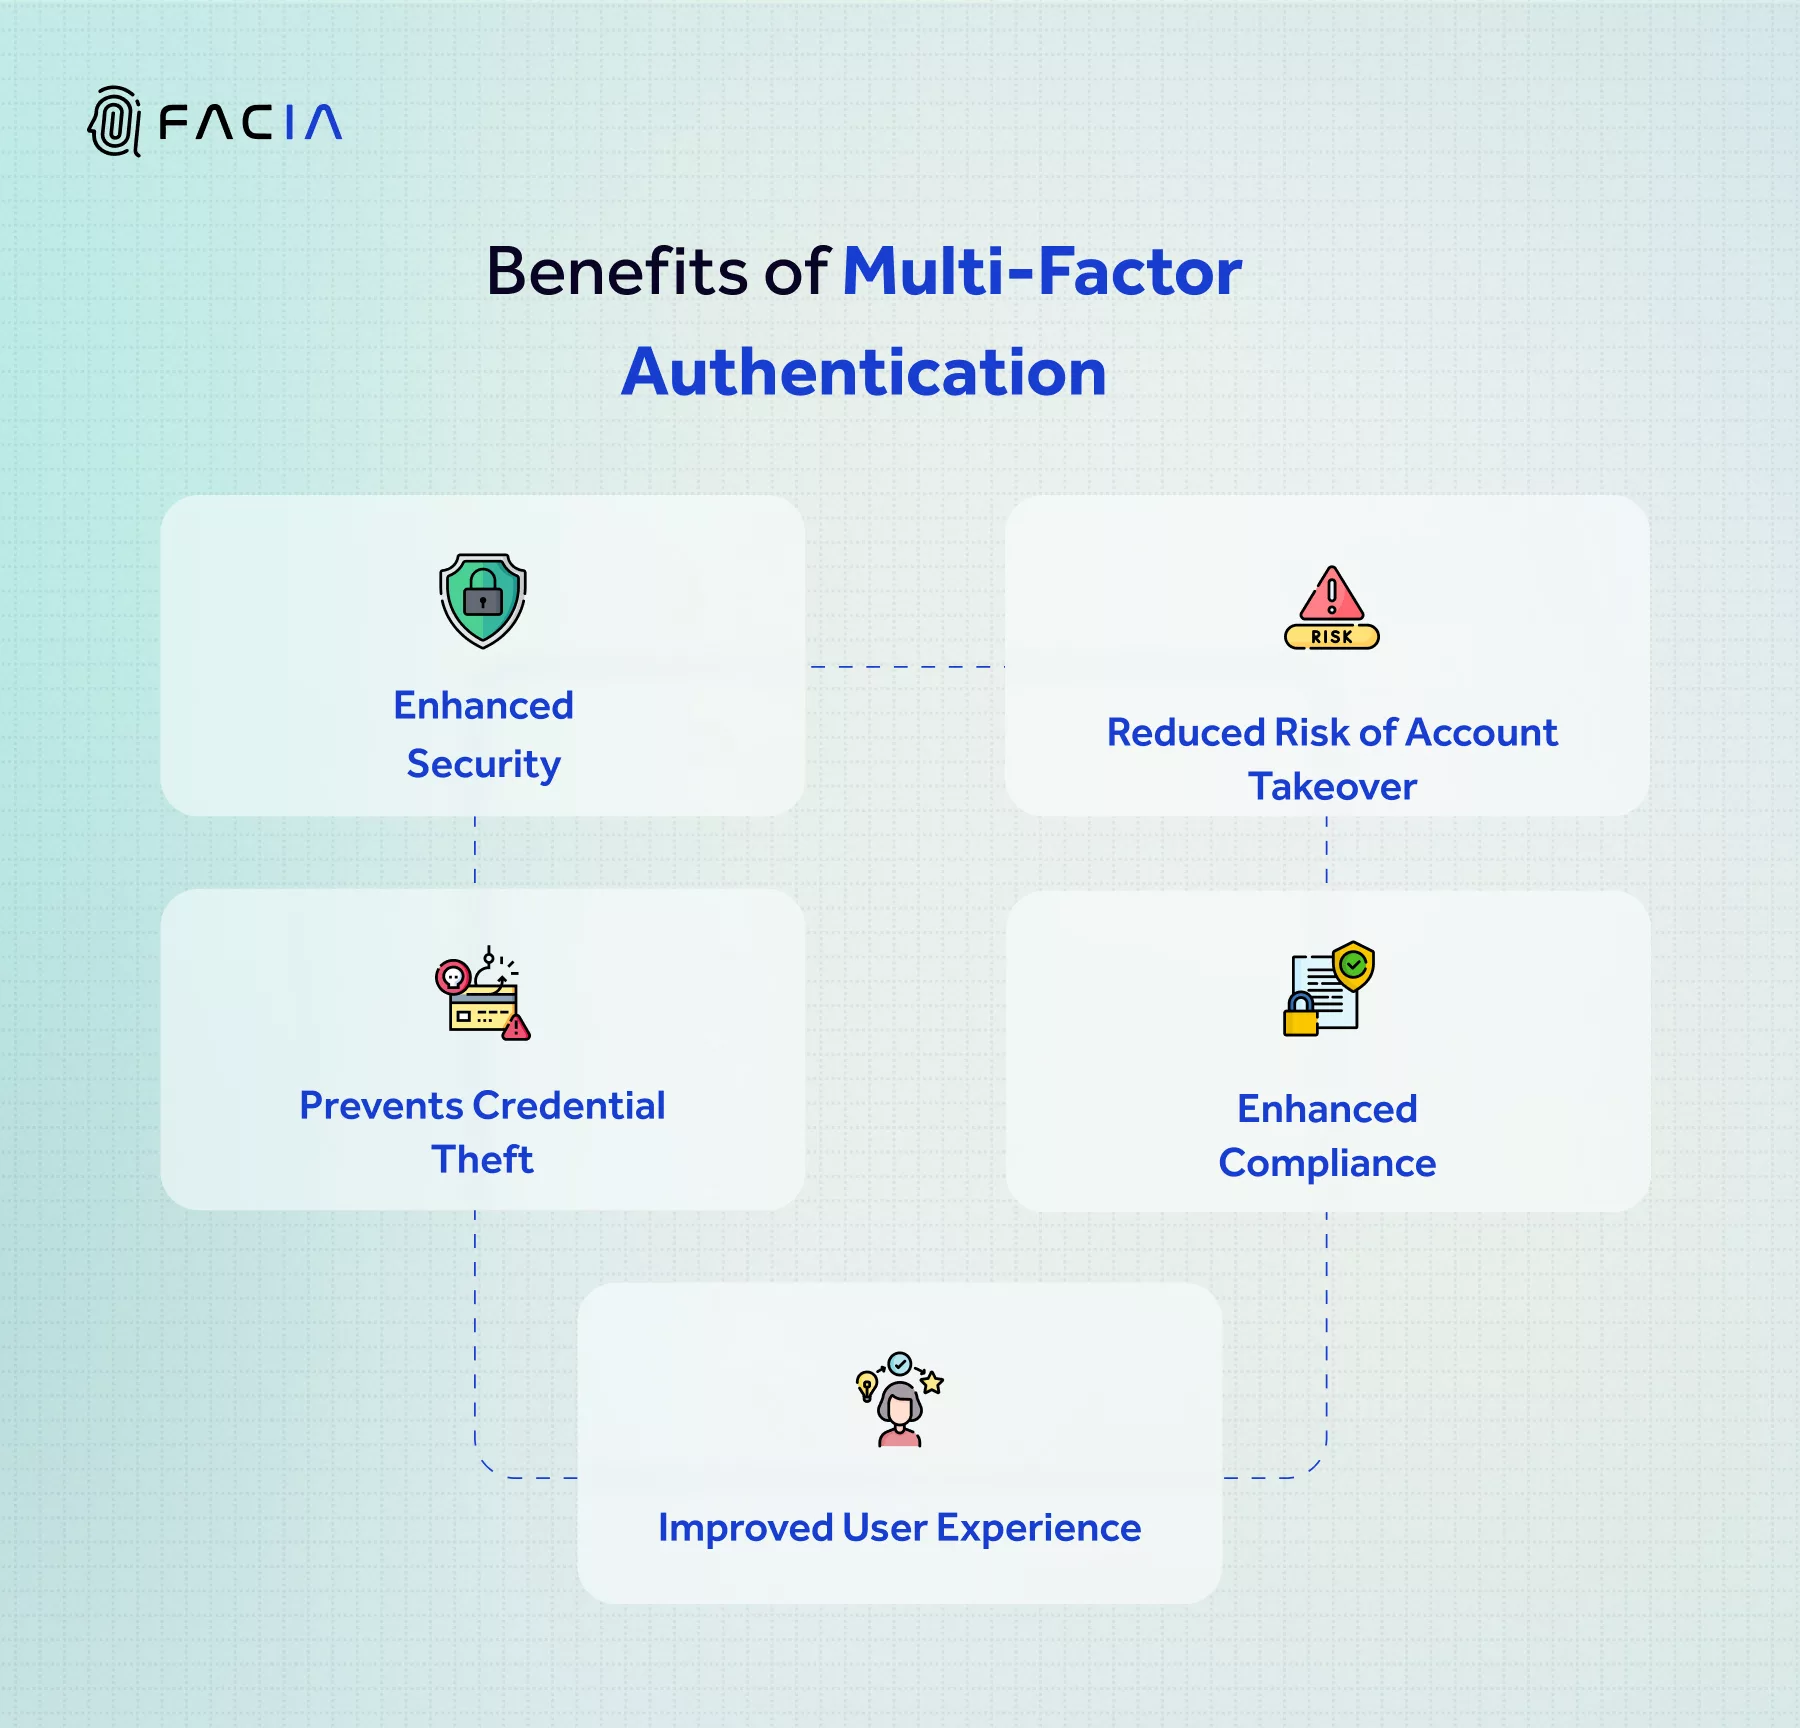 Benefits of Multi-Factor Authentication